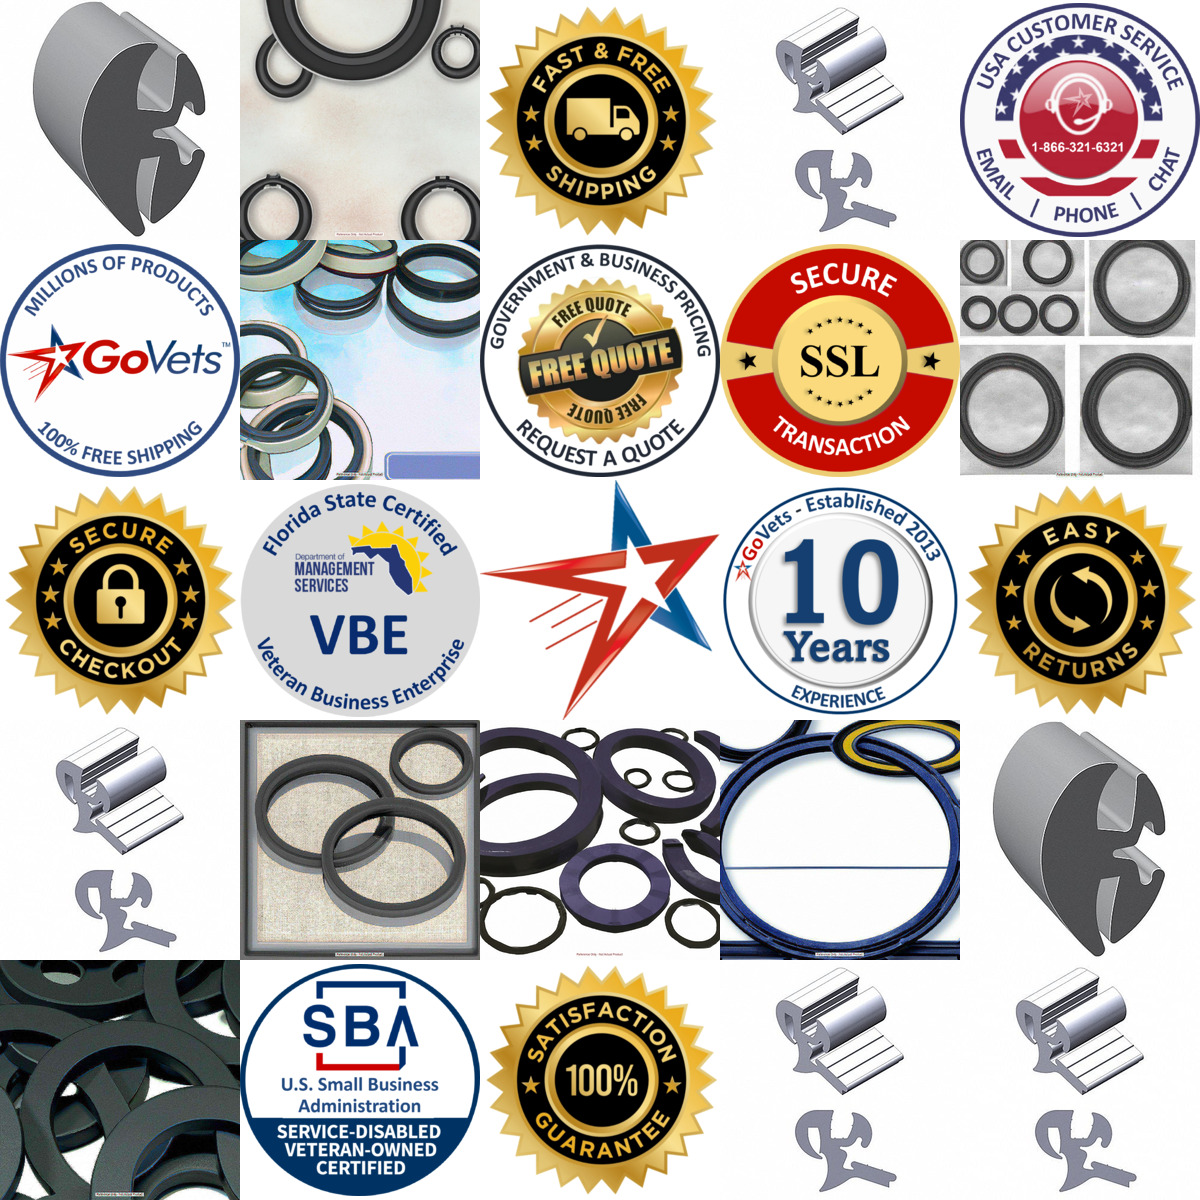 A selection of Rubber Locking Gaskets products on GoVets